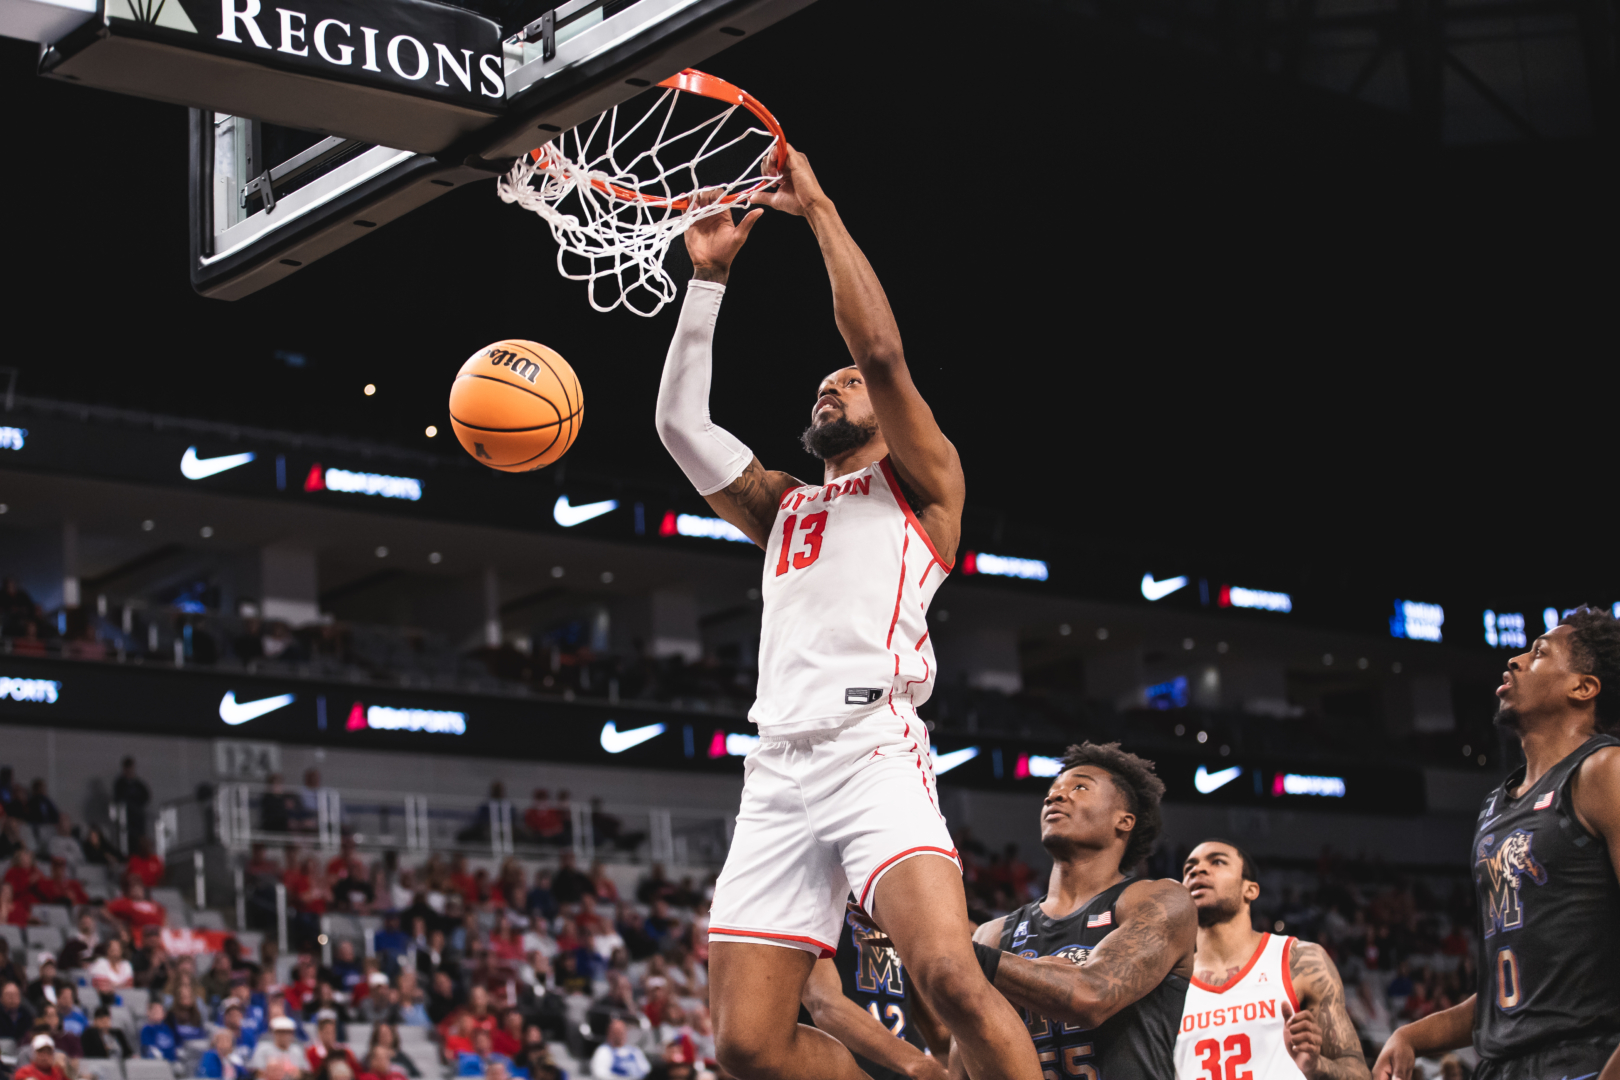 J'Wan Roberts pulled down a career-high 20 rebounds and scored 12 points for his sixth double-double of the season in UH's loss to Memphis in the AAC Tournament championship game. | Sean Thomas/contributor